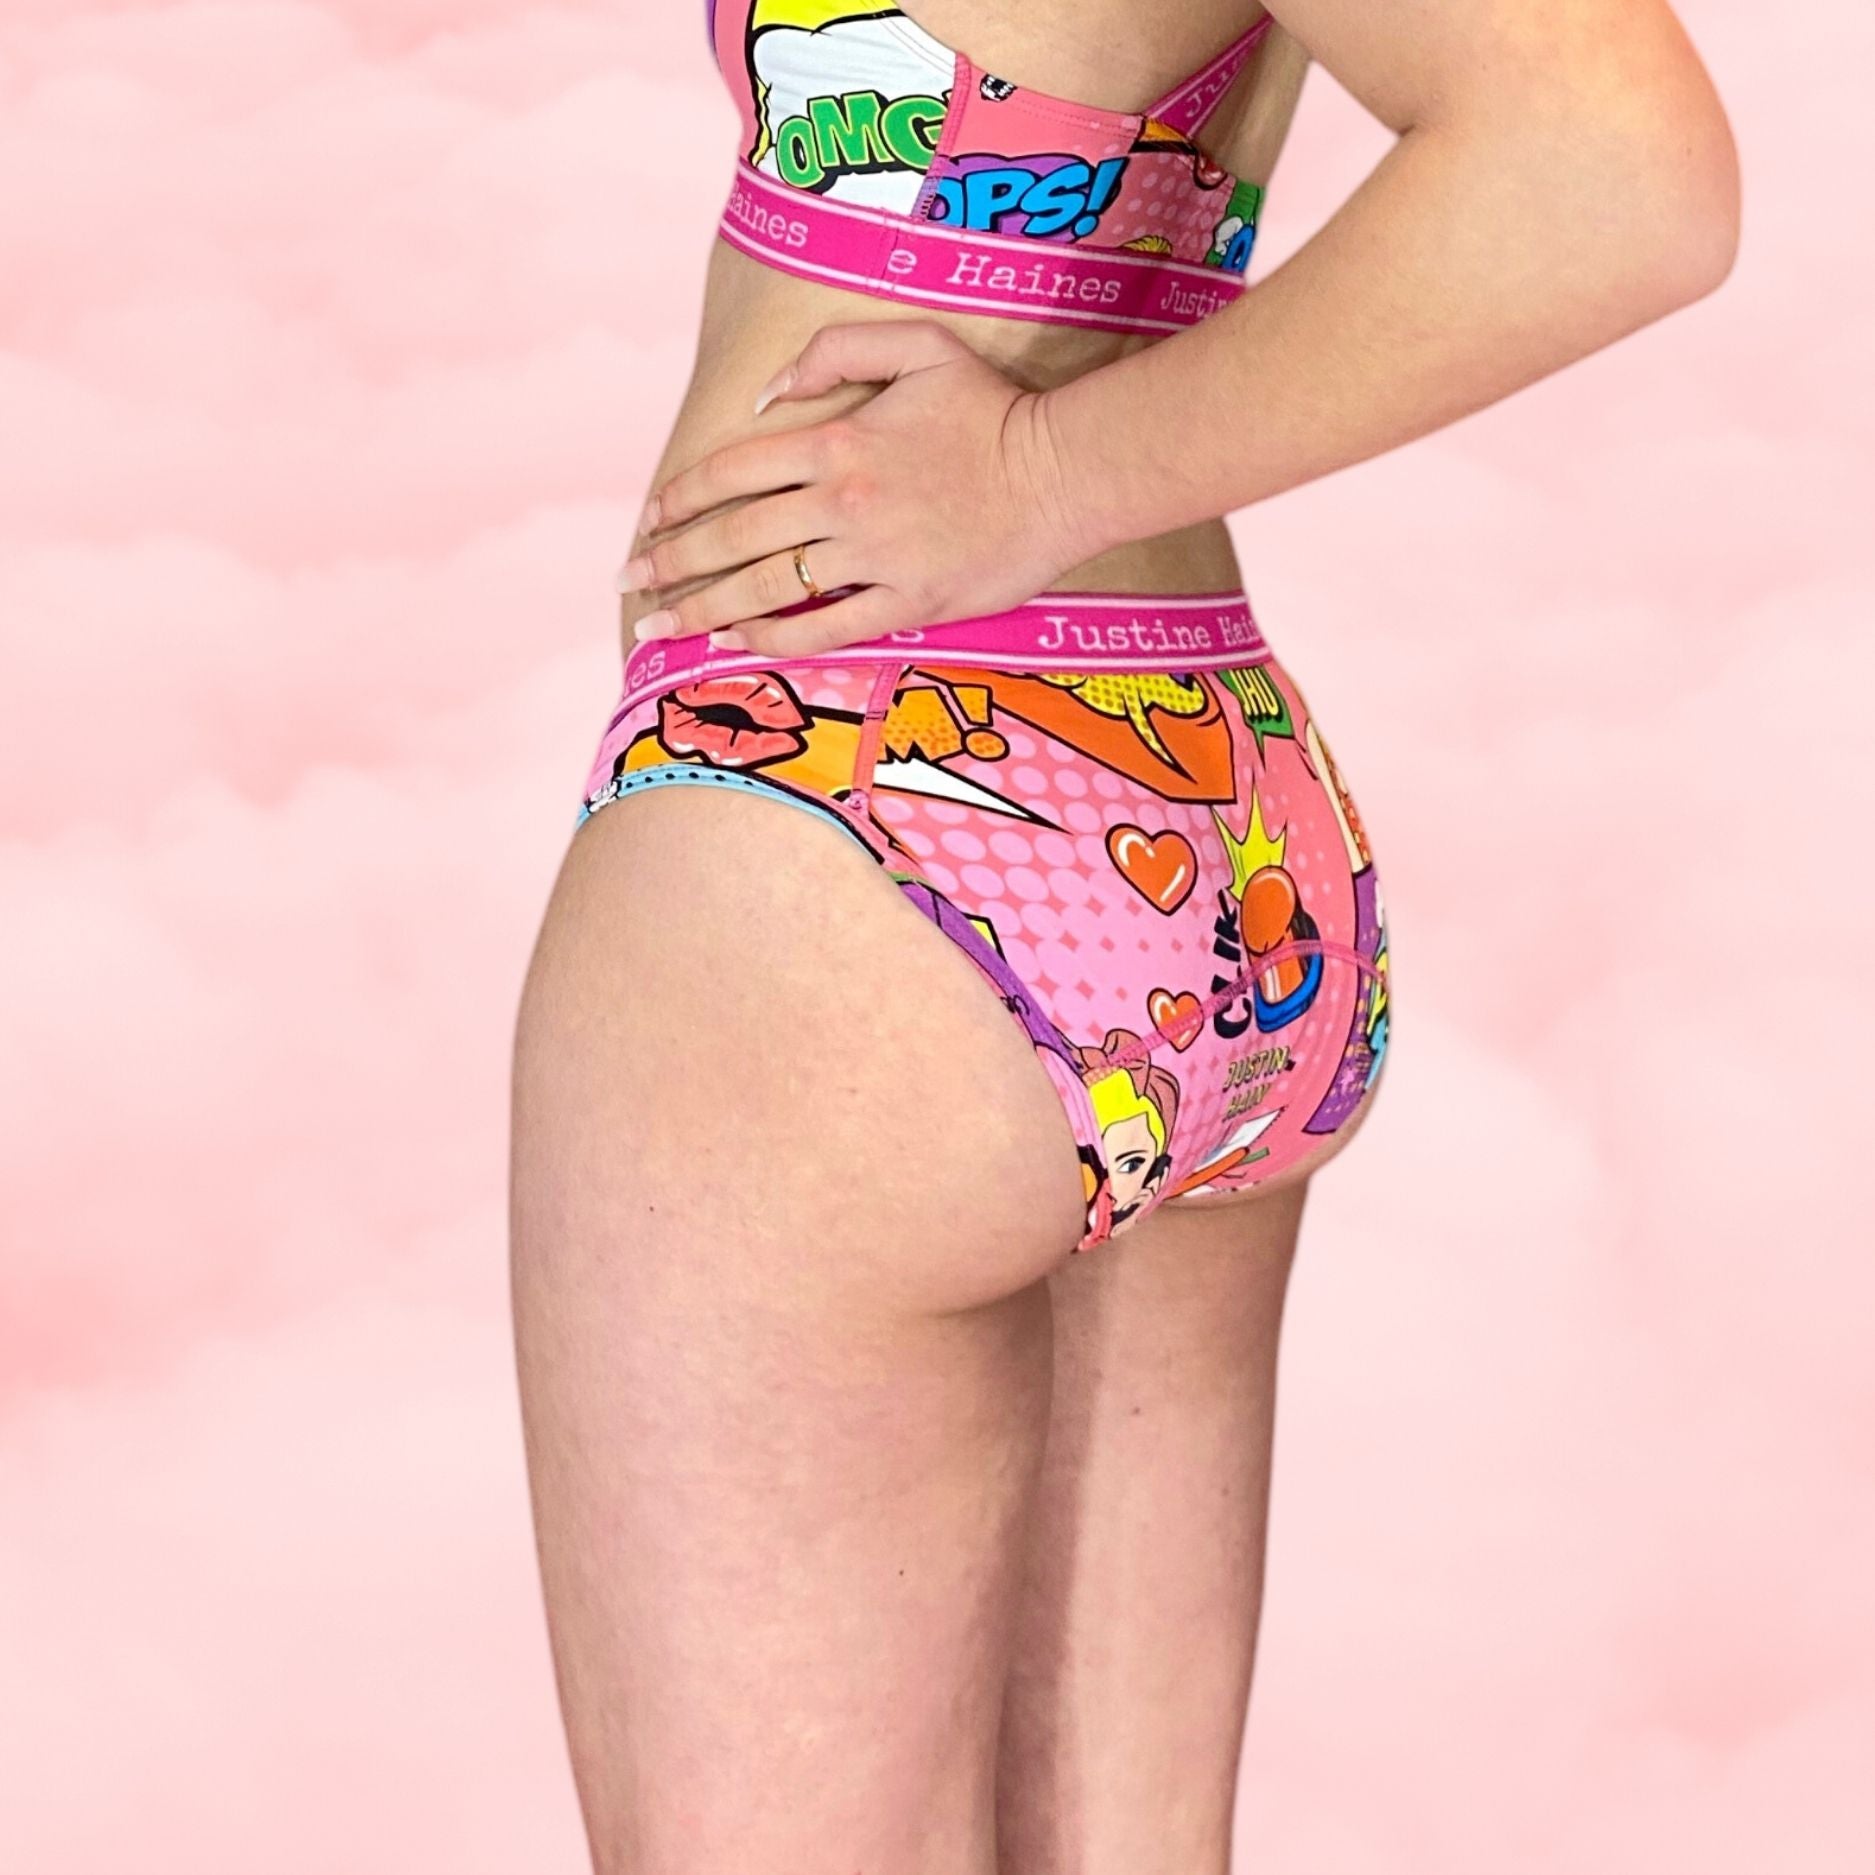 https://www.justinehaines.com/products/adorable-low-rise-fashion-print-period-panties-in-hot-pink-pop-art